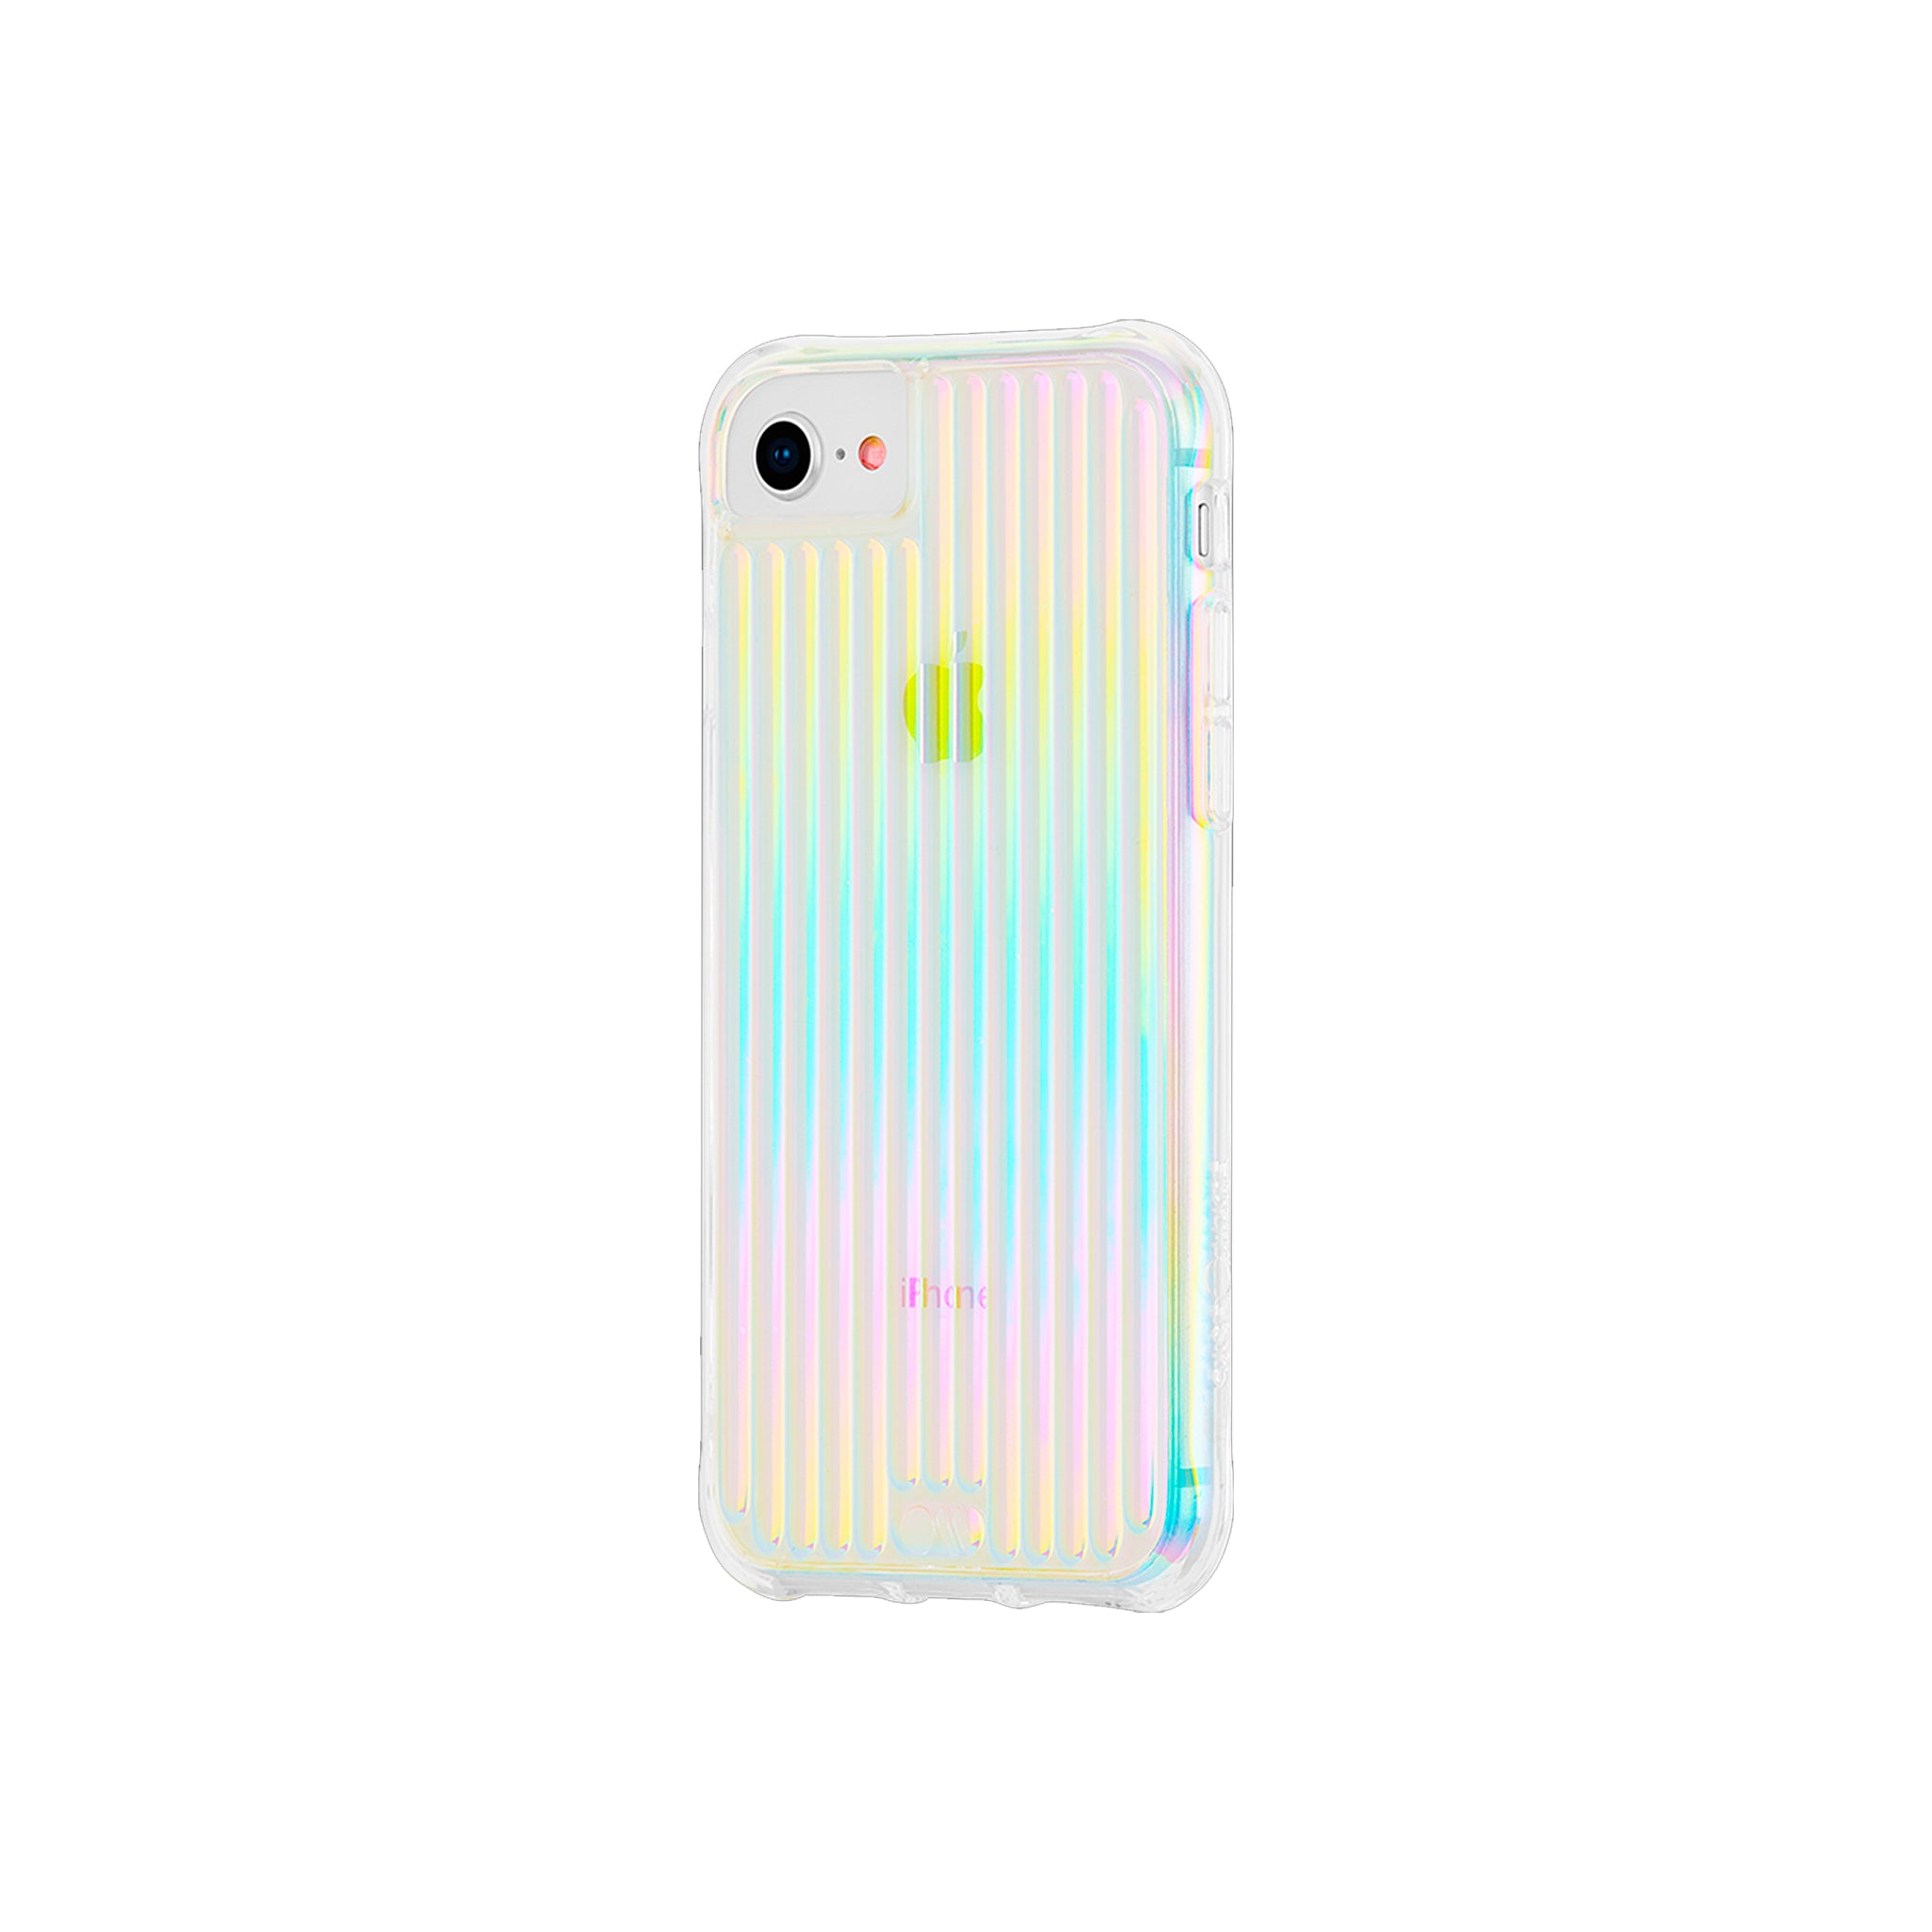 Case-mate - Tough Groove Case For Apple iPhone Se / 8 / 7 / 6s / 6 - Iridescent